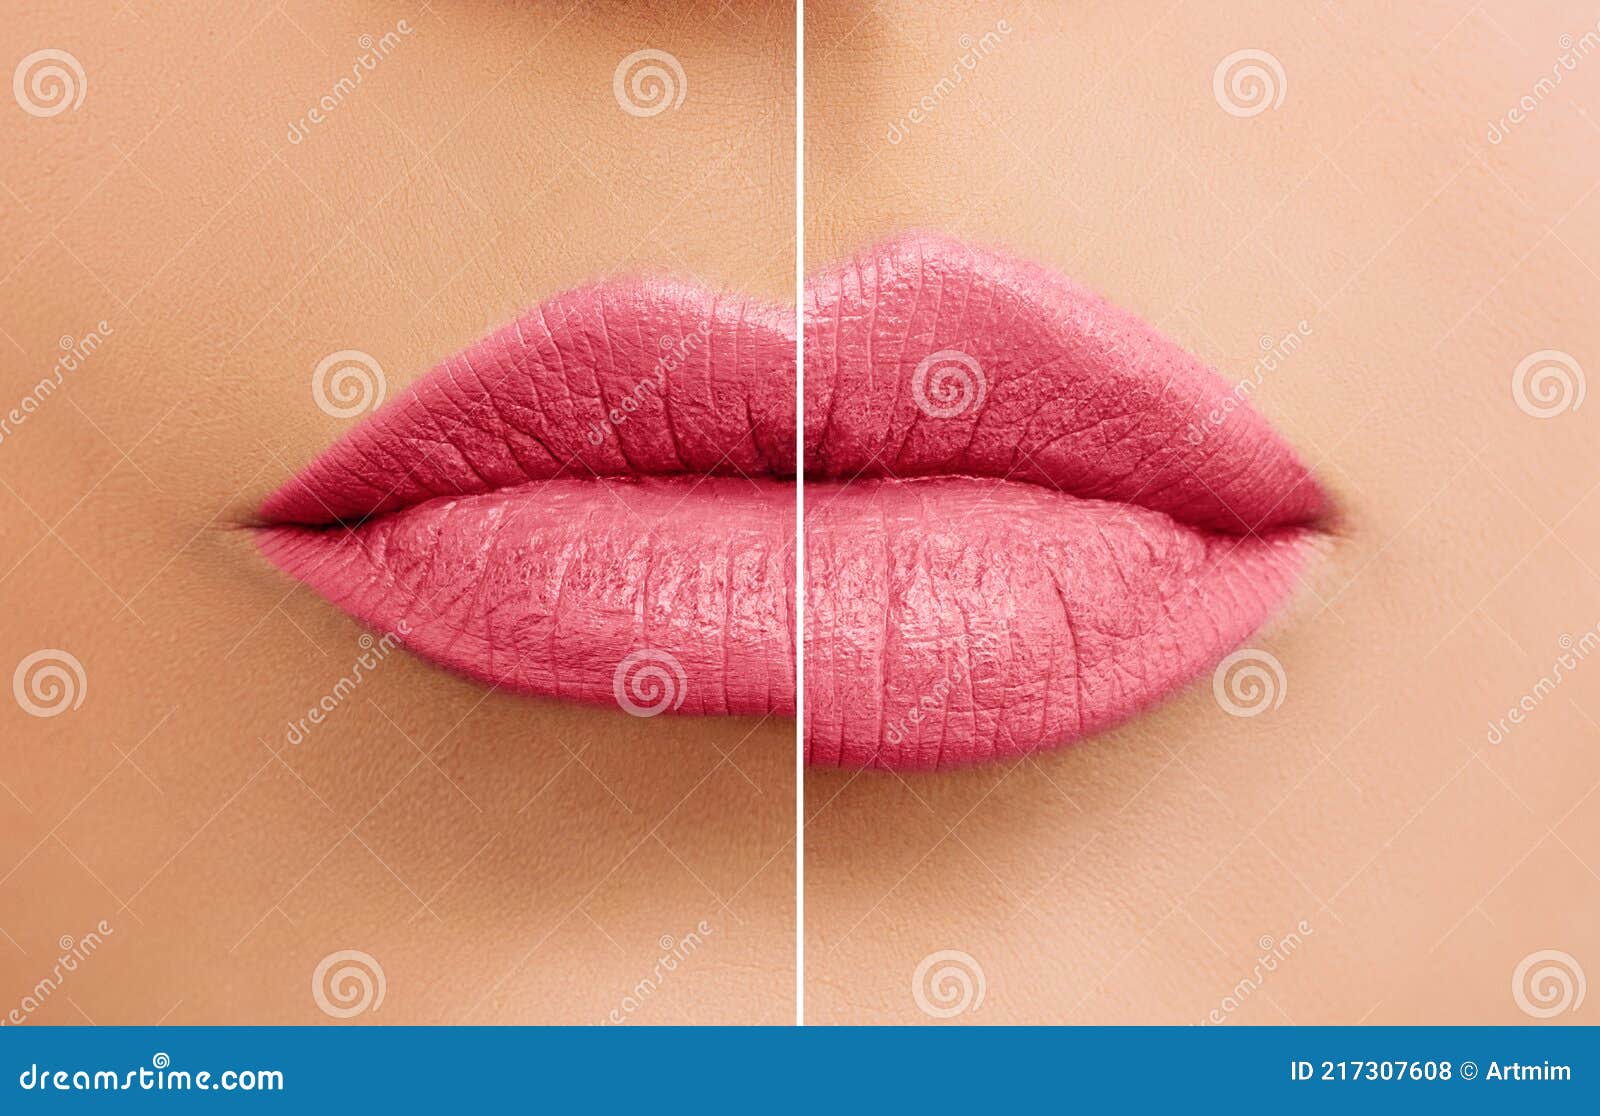 beautiful woman lips before and after lip filler injections close up